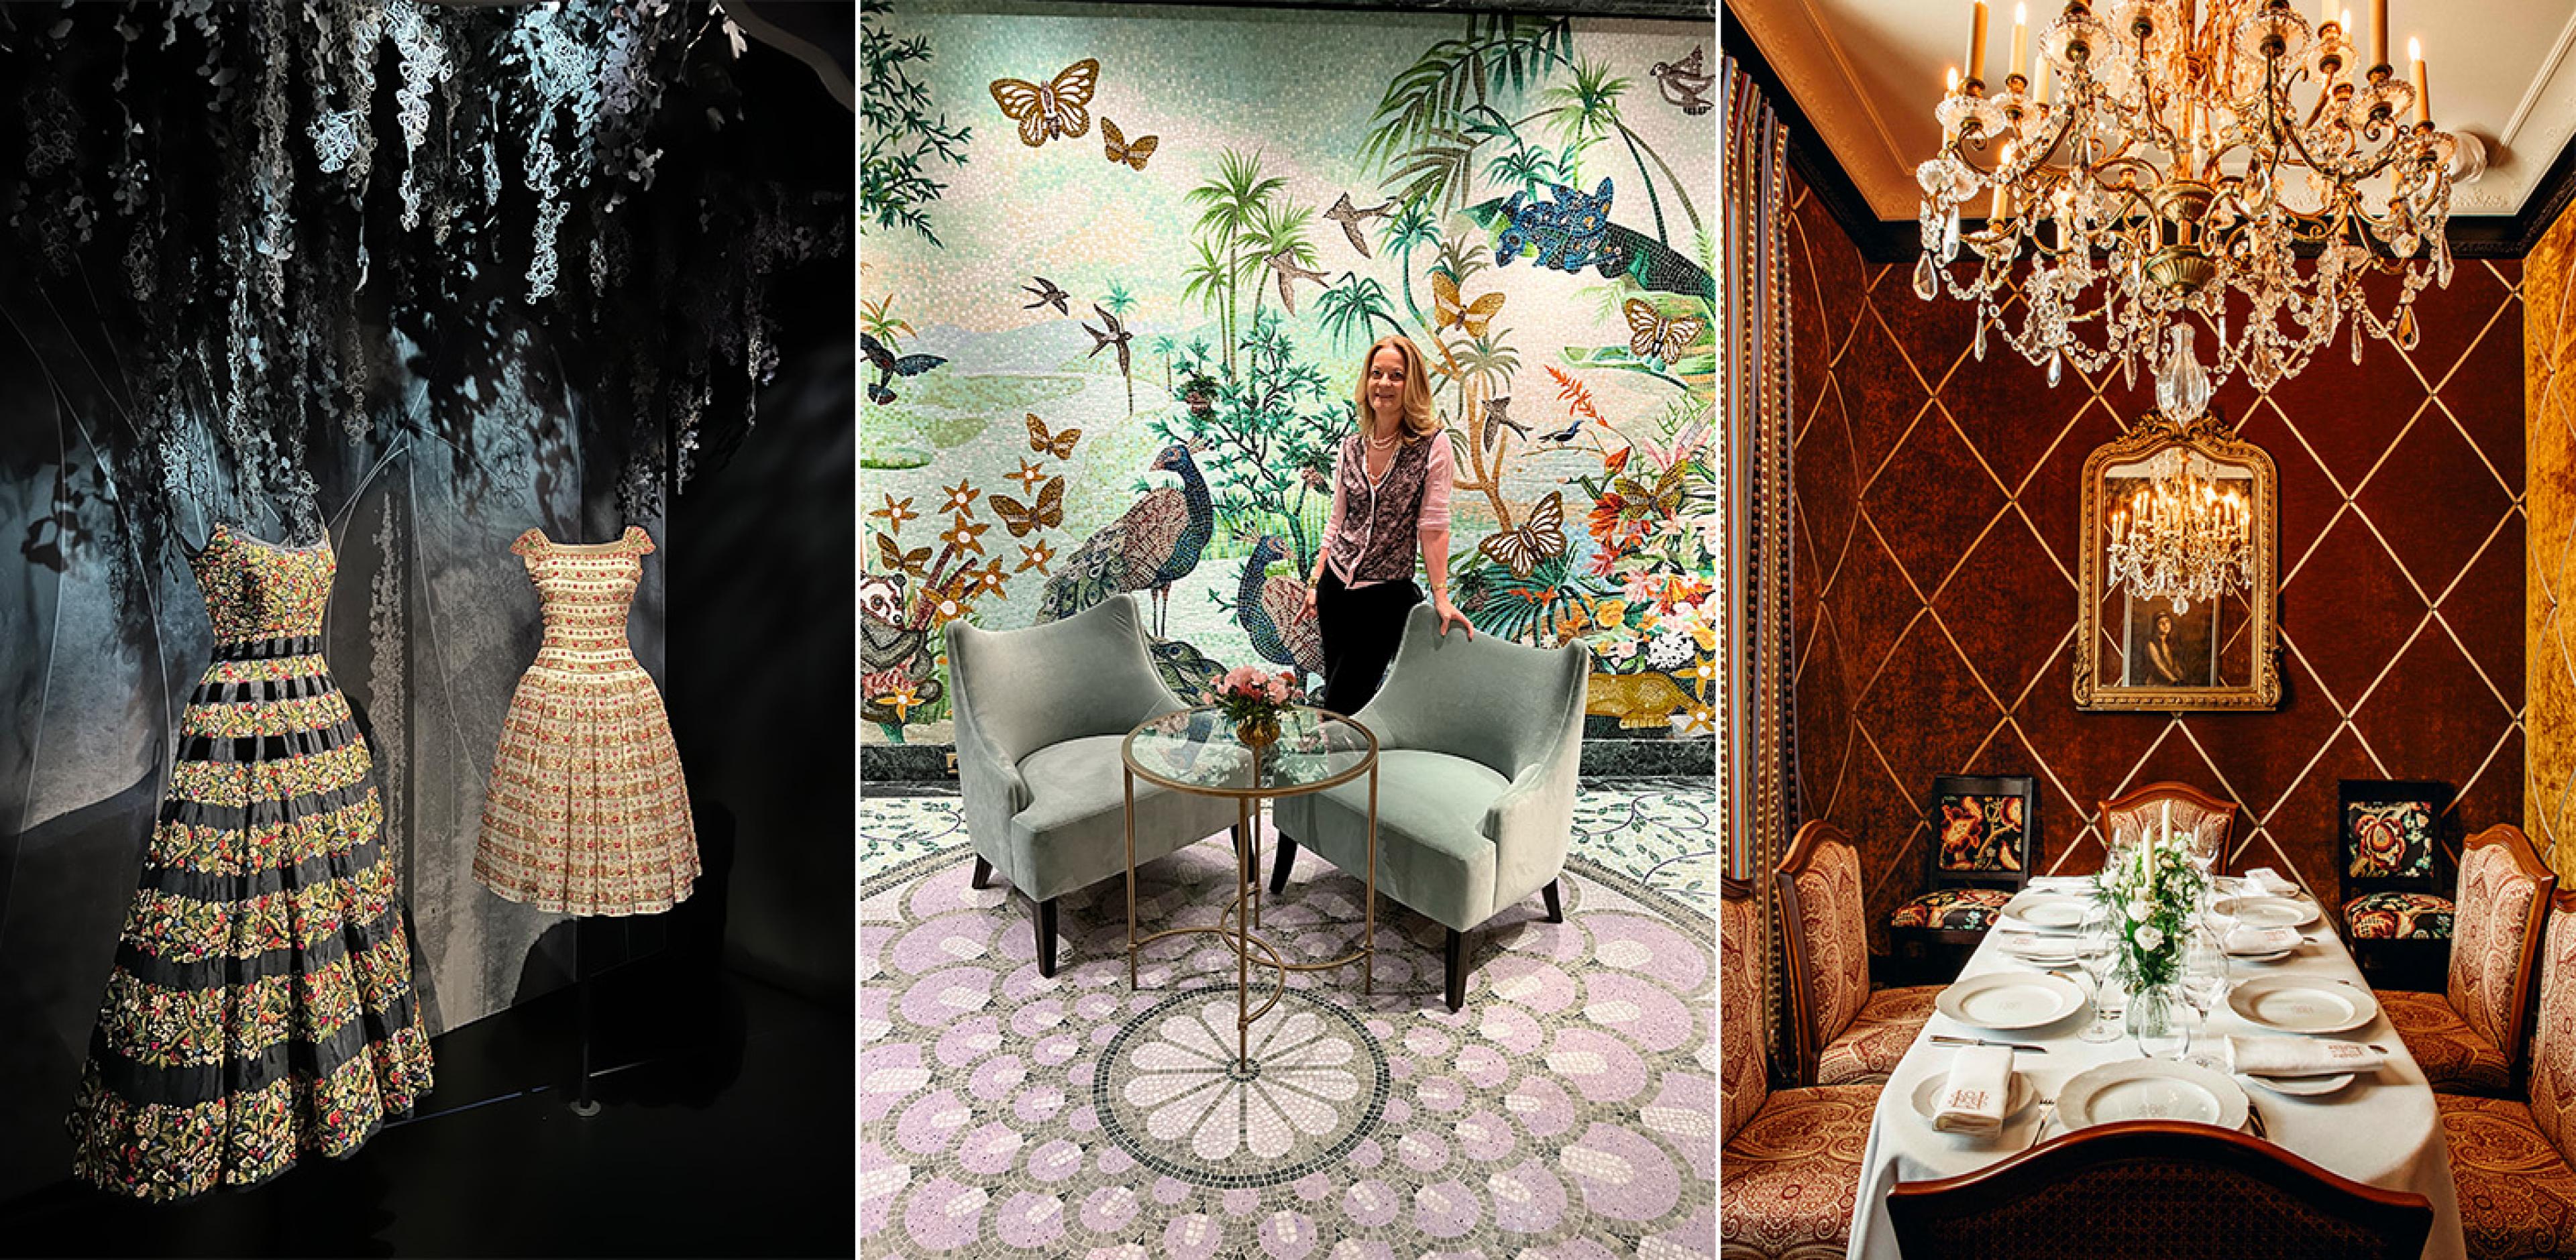 dresses on mannequins, a woman in a lounge with a bird mural behind her and a private dining room with a crystal chandelier